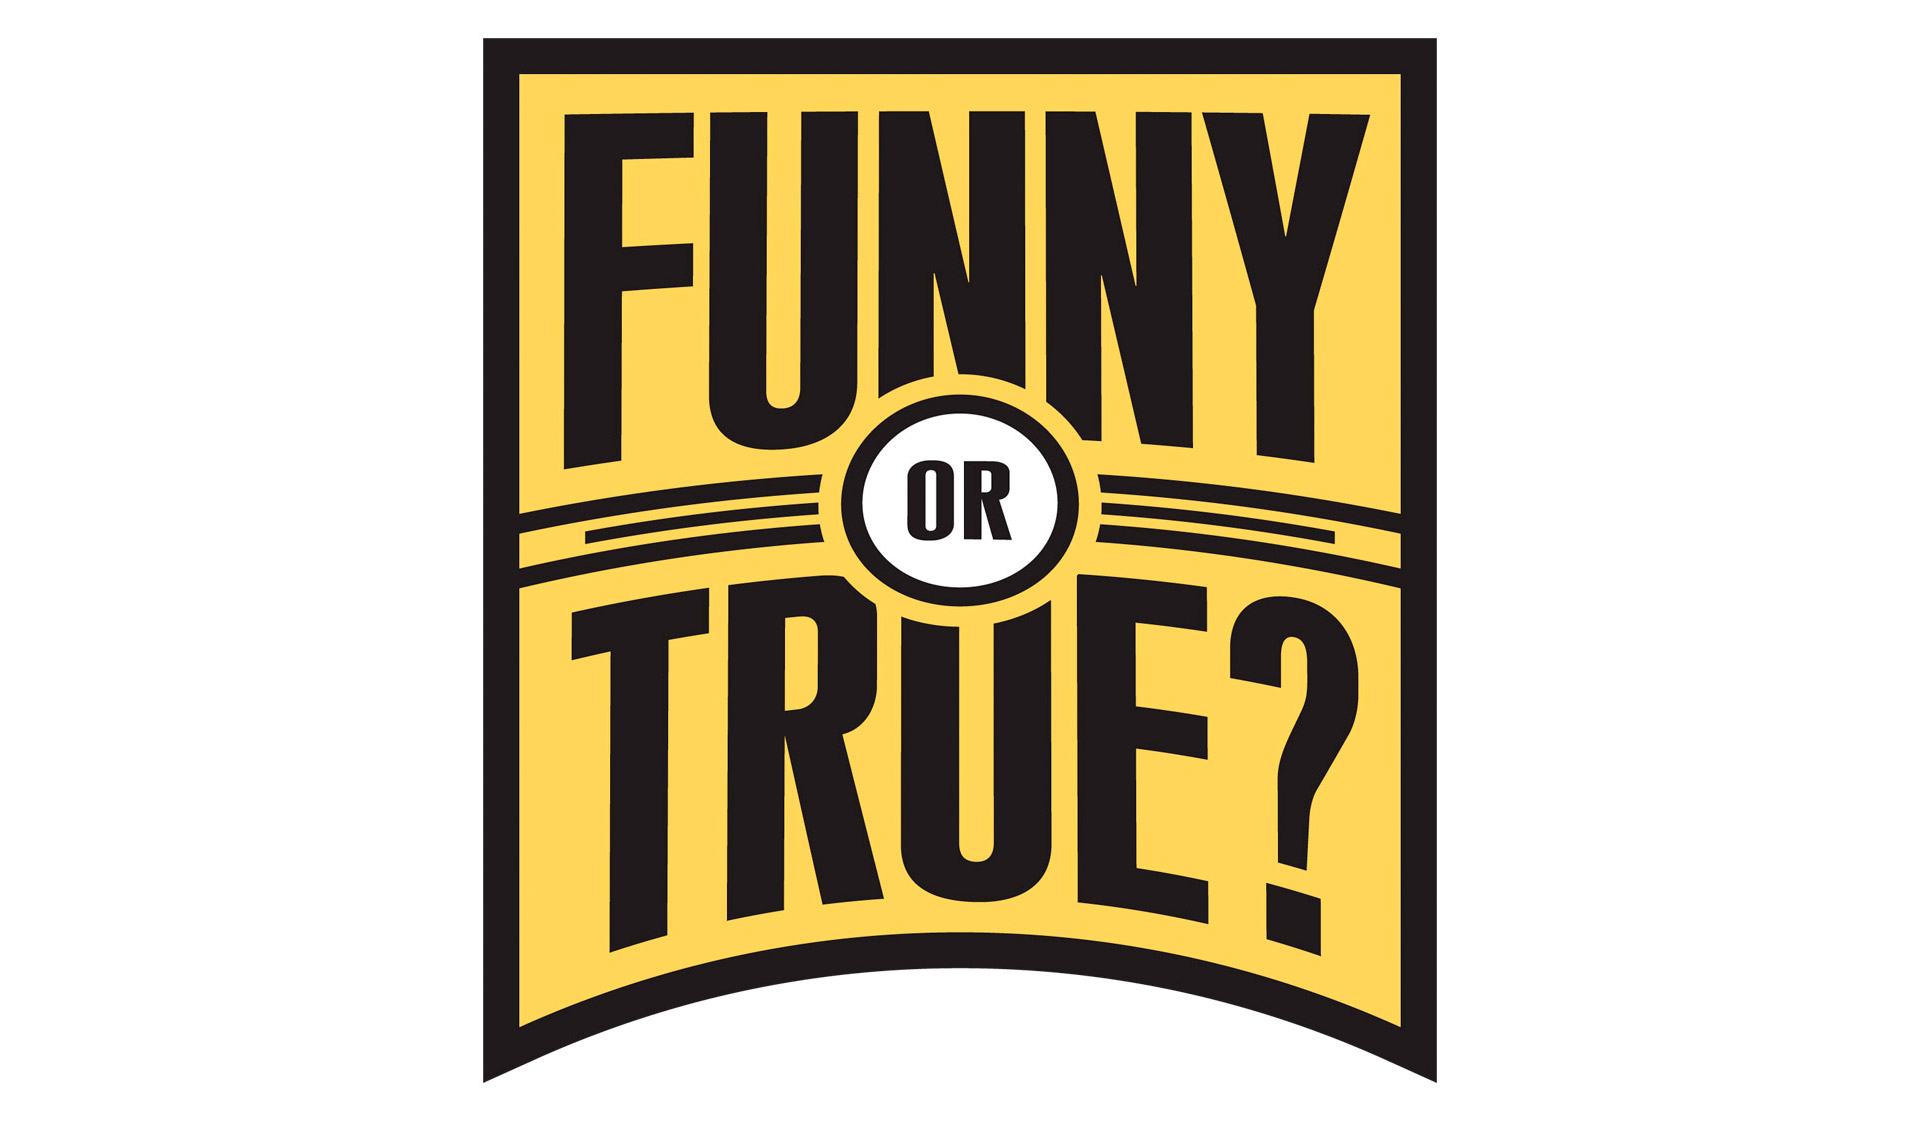 Funny or True? Game Show Branding